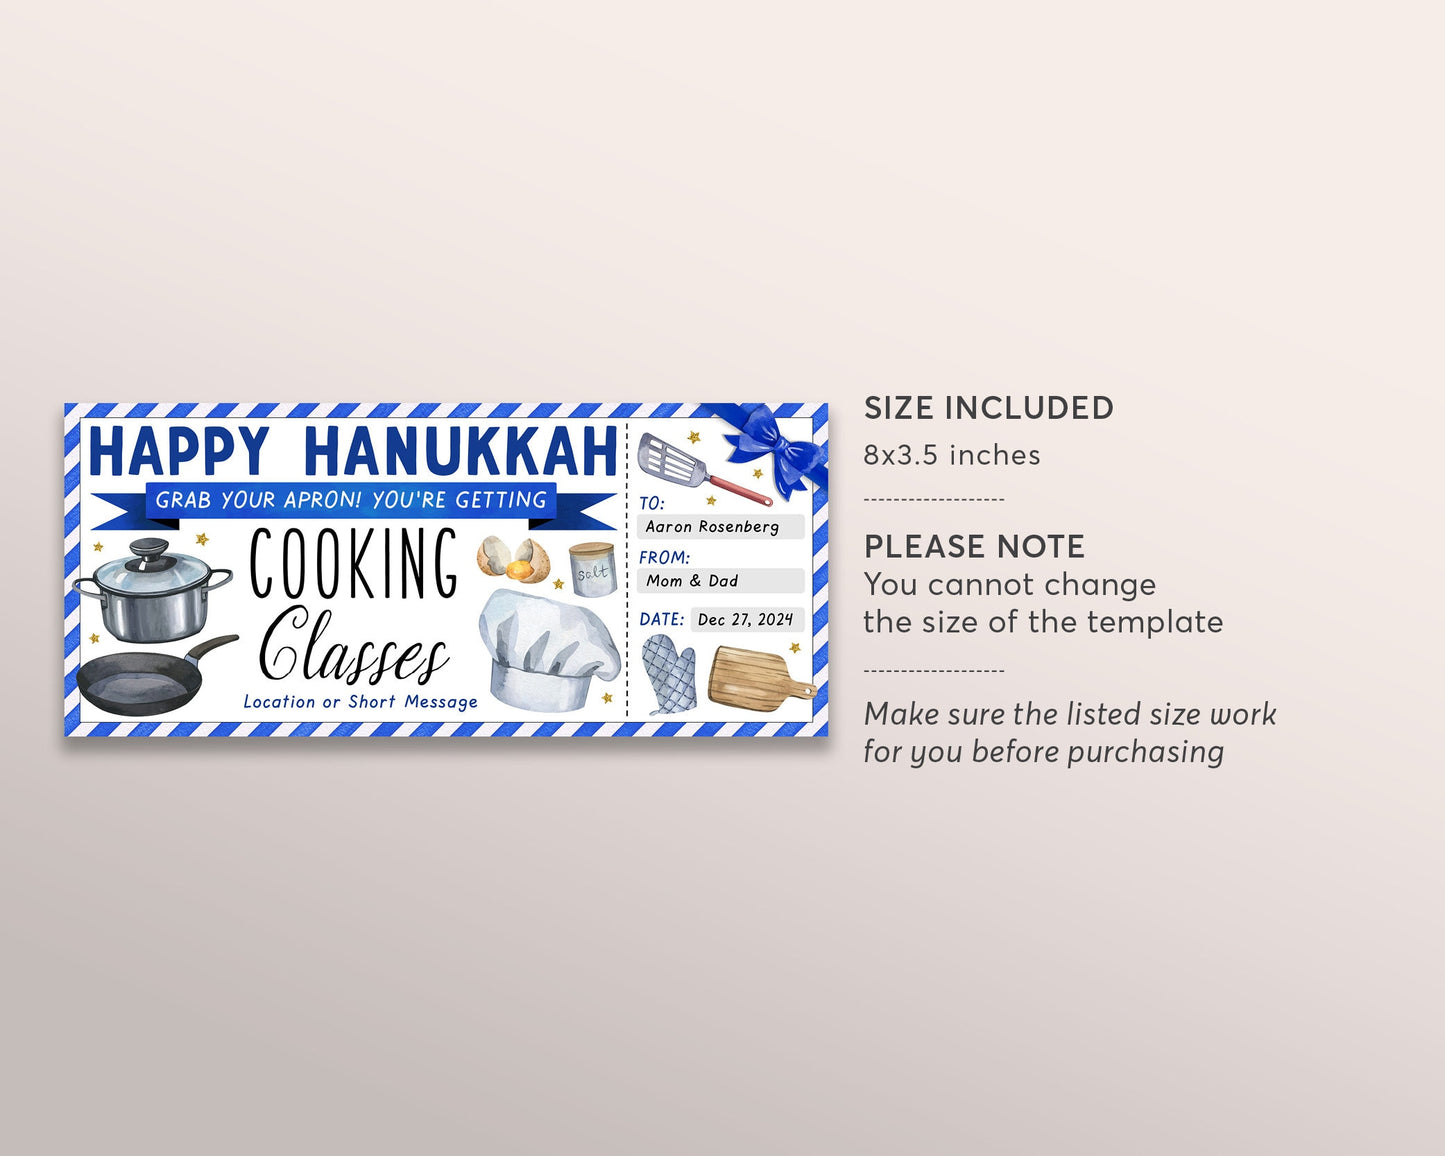 Happy Hanukkah Cooking Classes Gift Certificate Ticket Editable Template, Chanukah Surprise Cooking Lessons Experience Gift Voucher